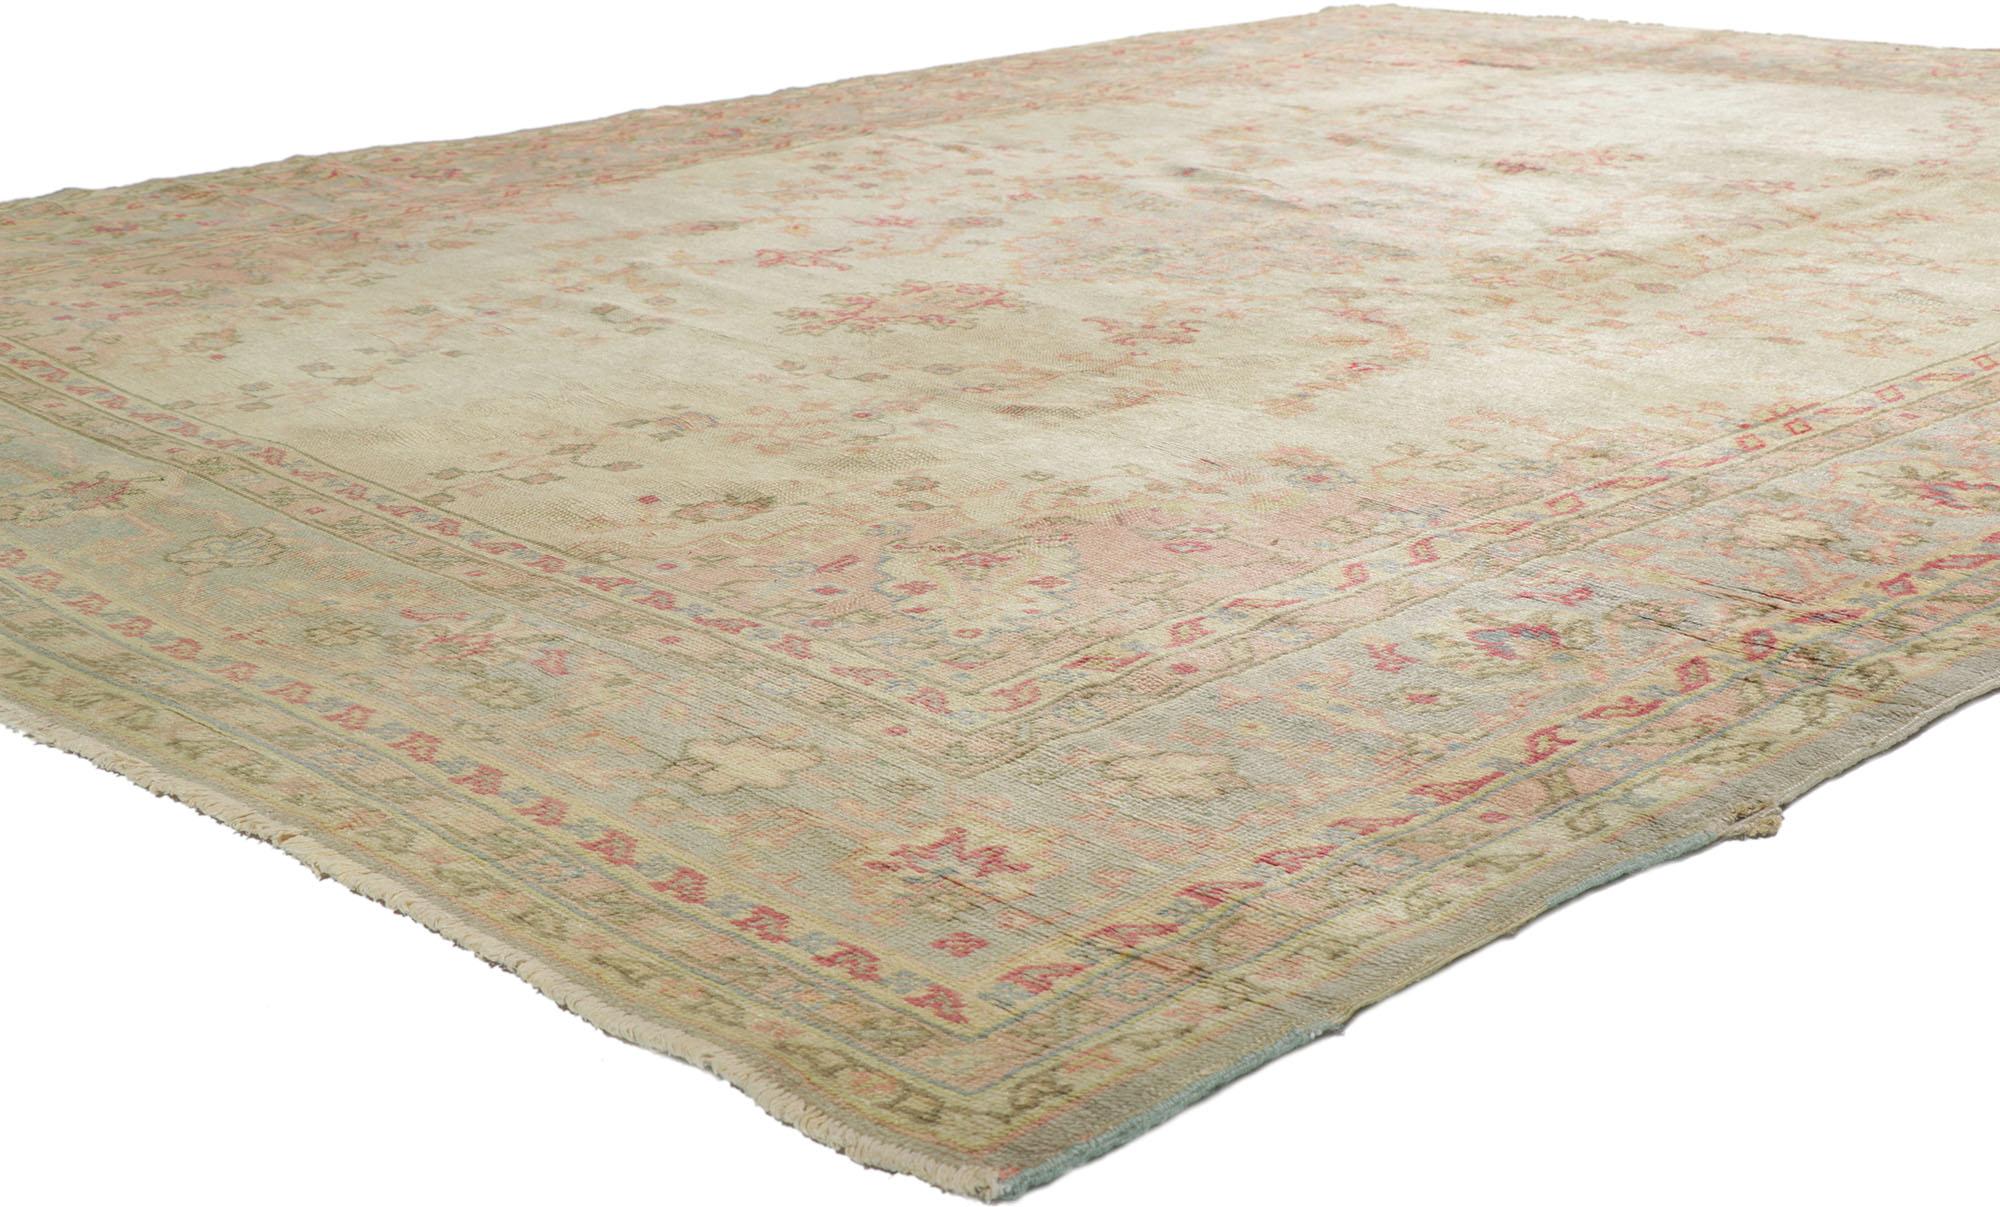 71741 distressed antique Turkish Oushak rug with Rustic Georgian style. With its warm pastel colors and architectural elements of naturalistic forms with a lovingly time-worn aesthetic, this hand-knotted wool antique Turkish Oushak rug beautifully